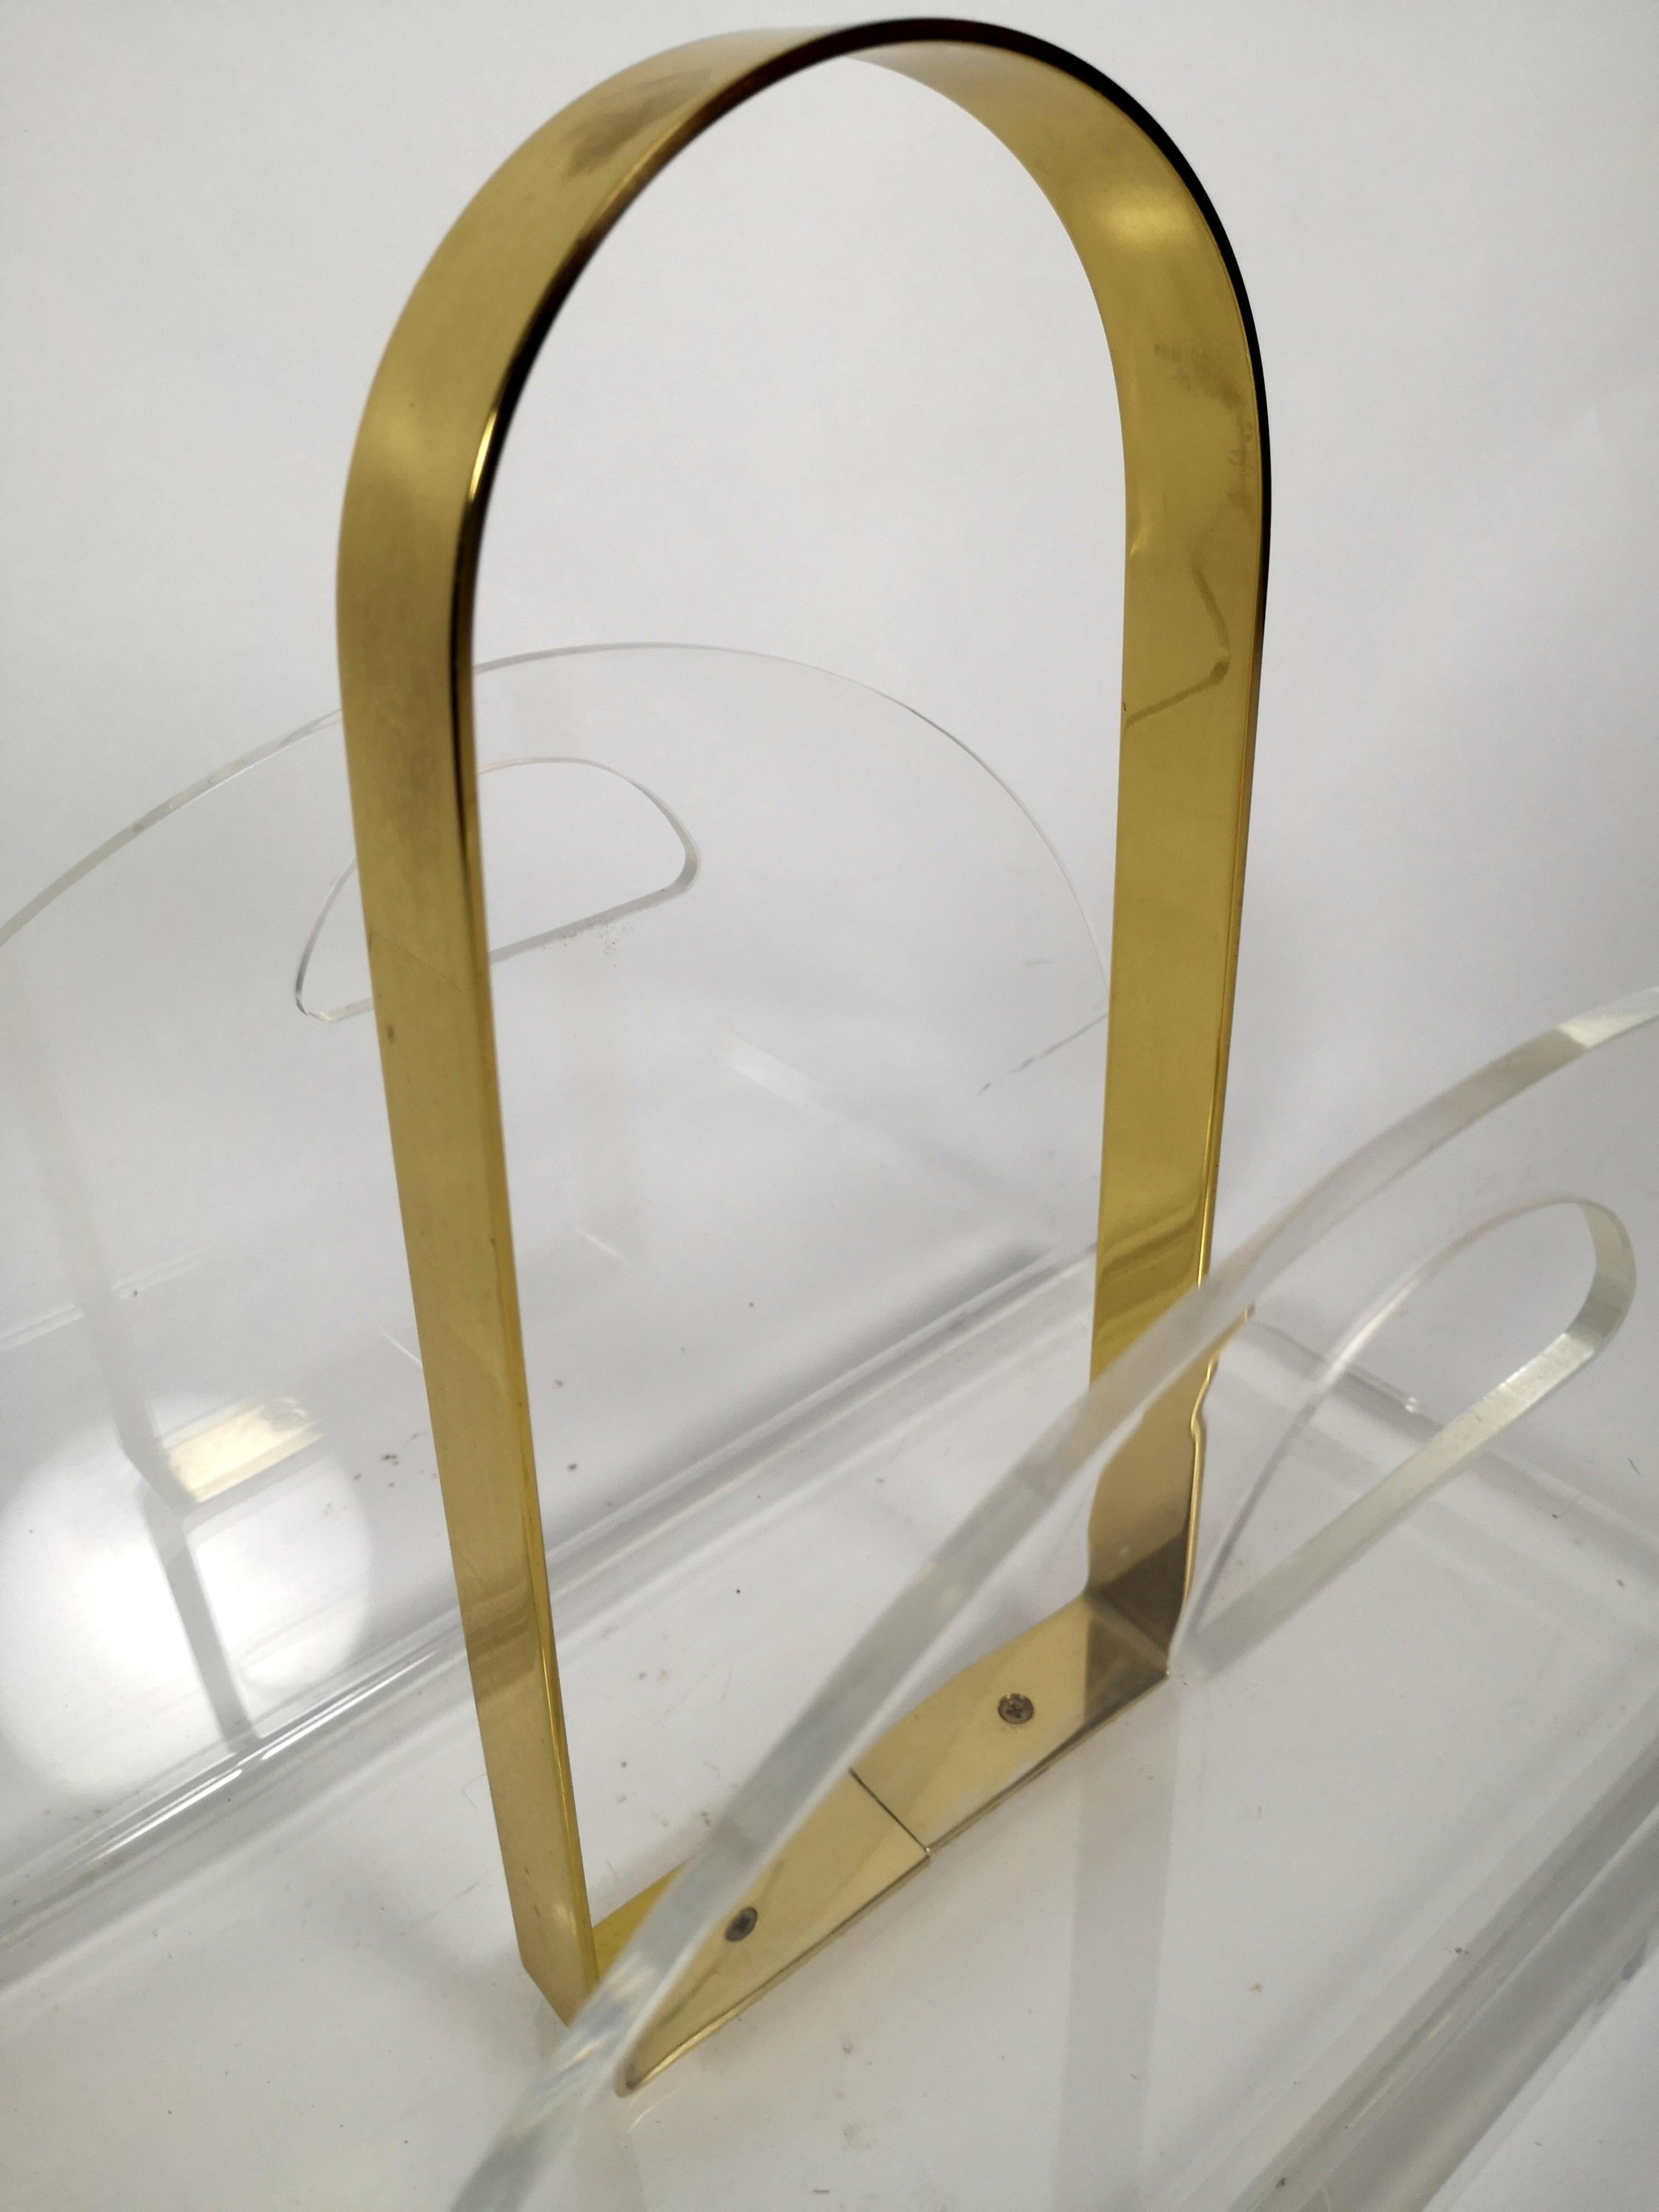 This 1970s portable magazine rack features a gold plated lacquered handle and a plexiglass body. Aside from minor scratches it's in great condition.